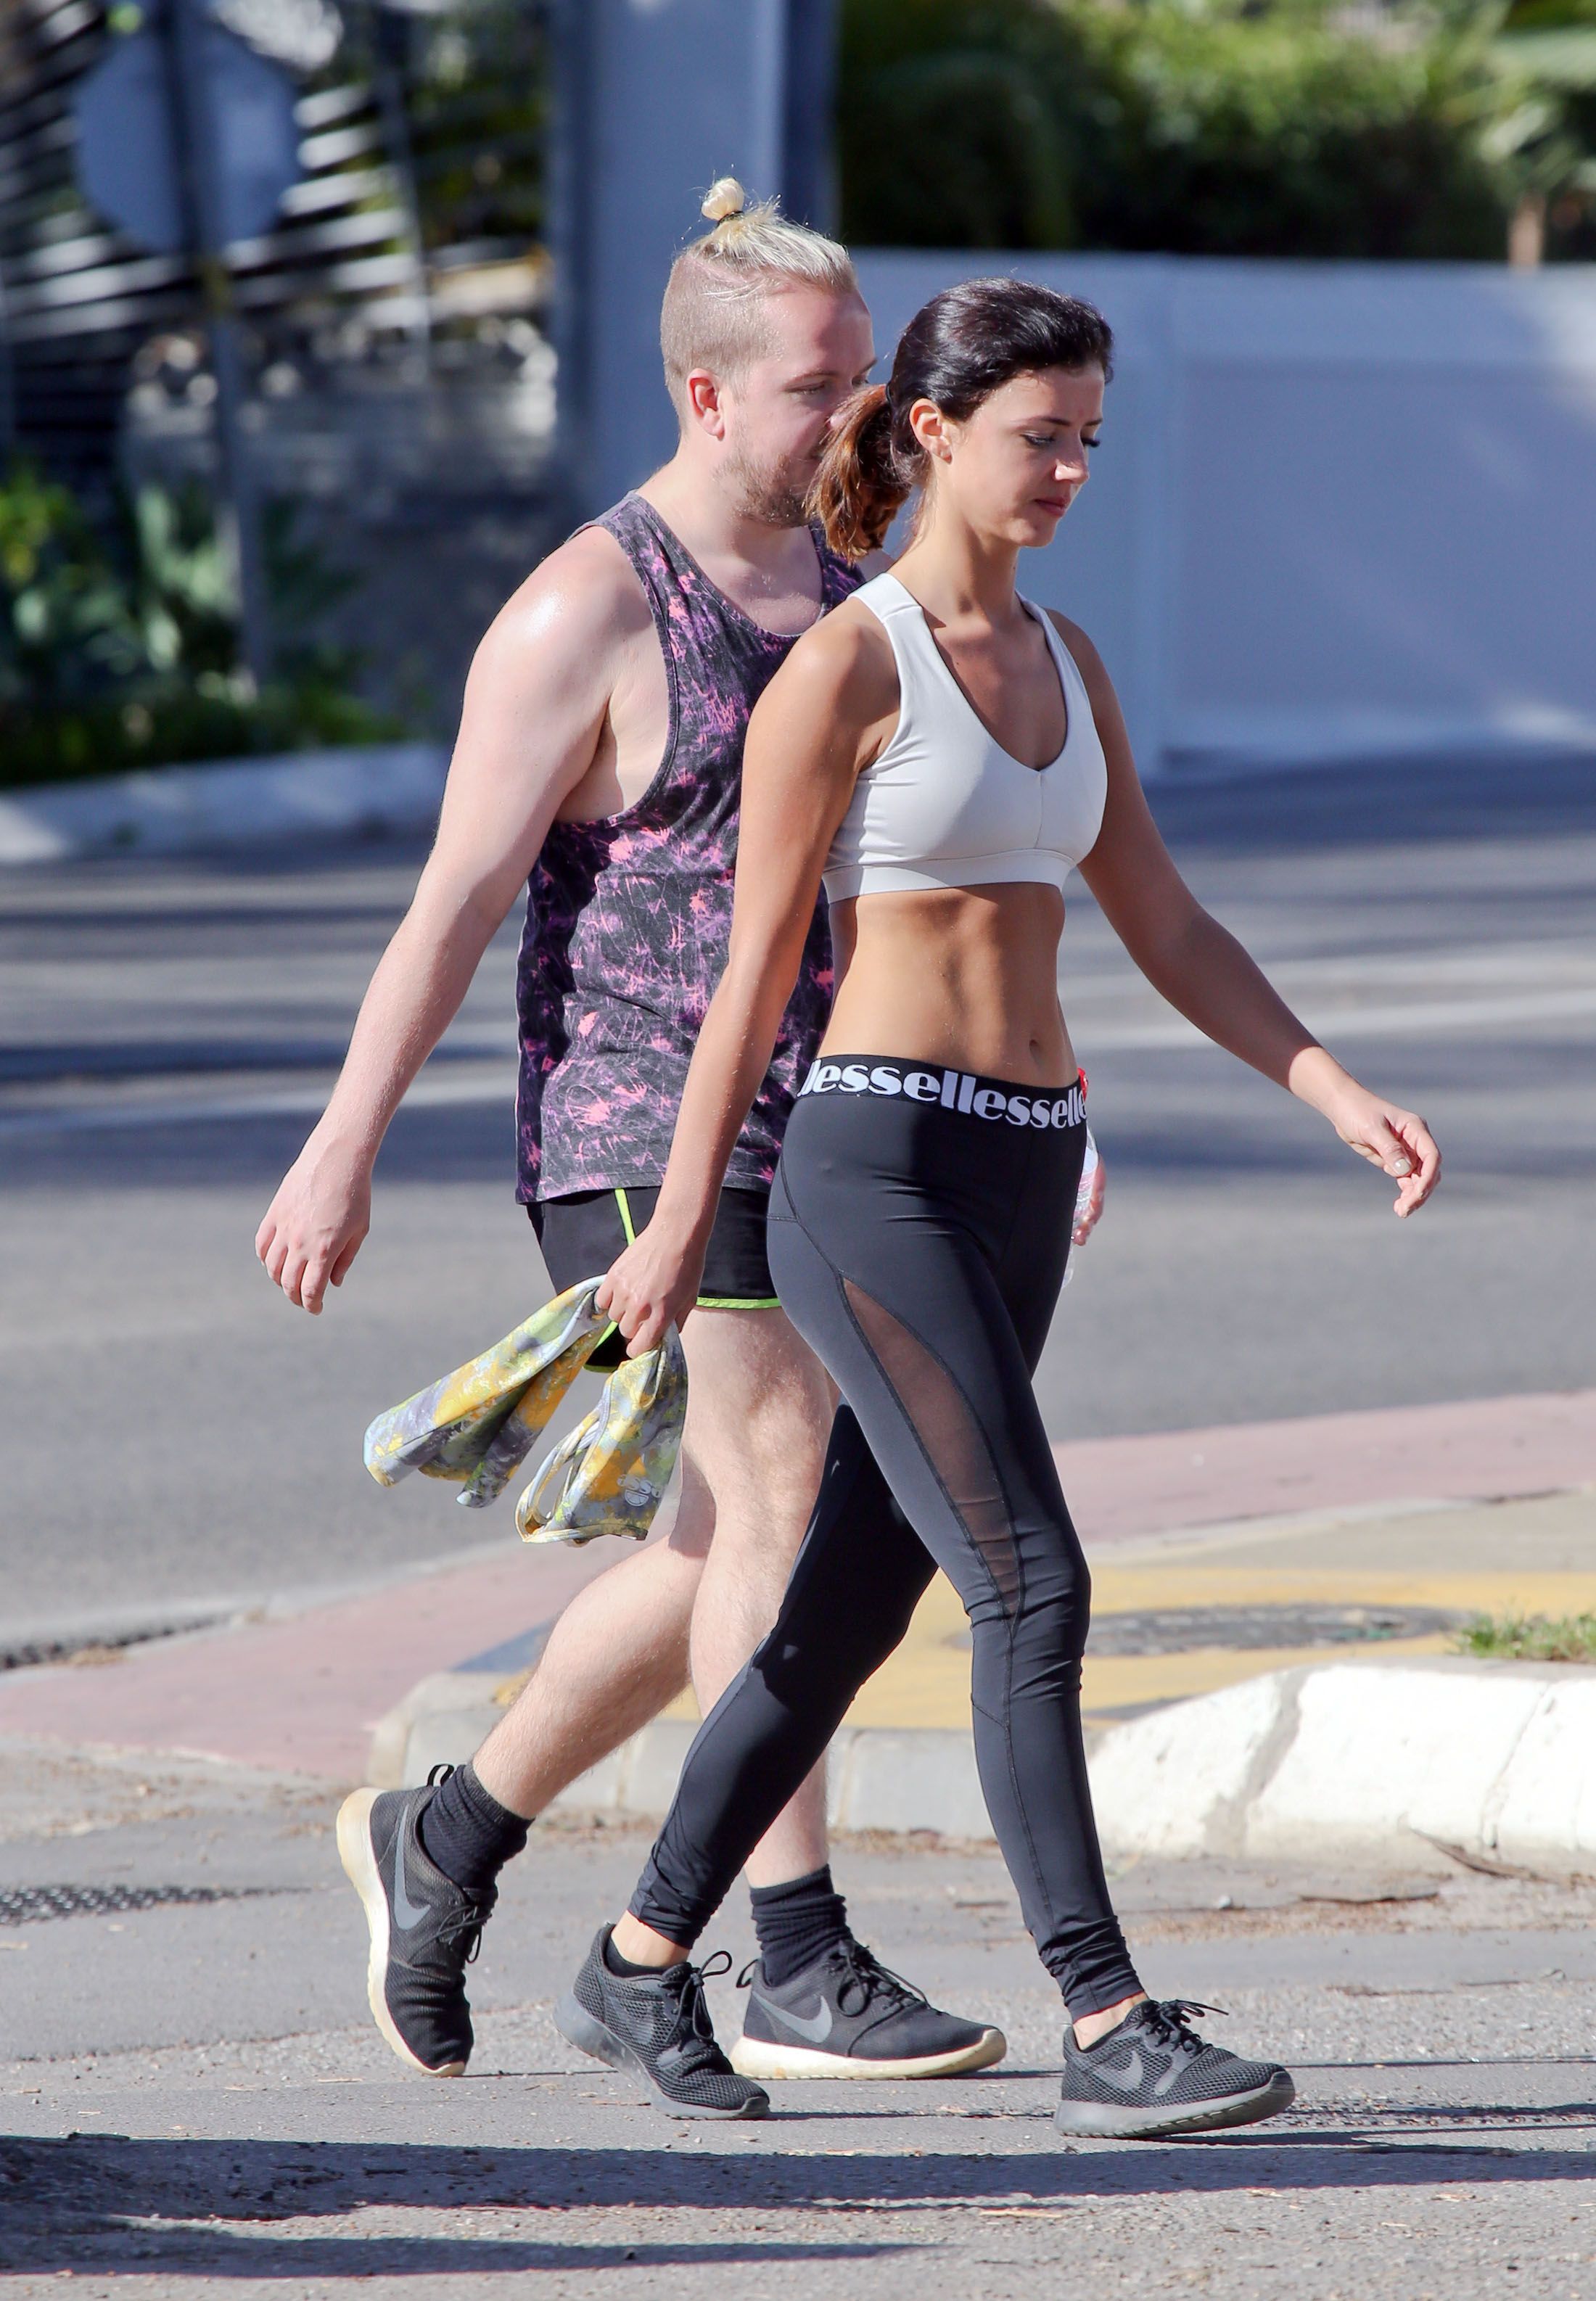 Lucy Mecklenburgh is Sweaty and Beautiful #79612290